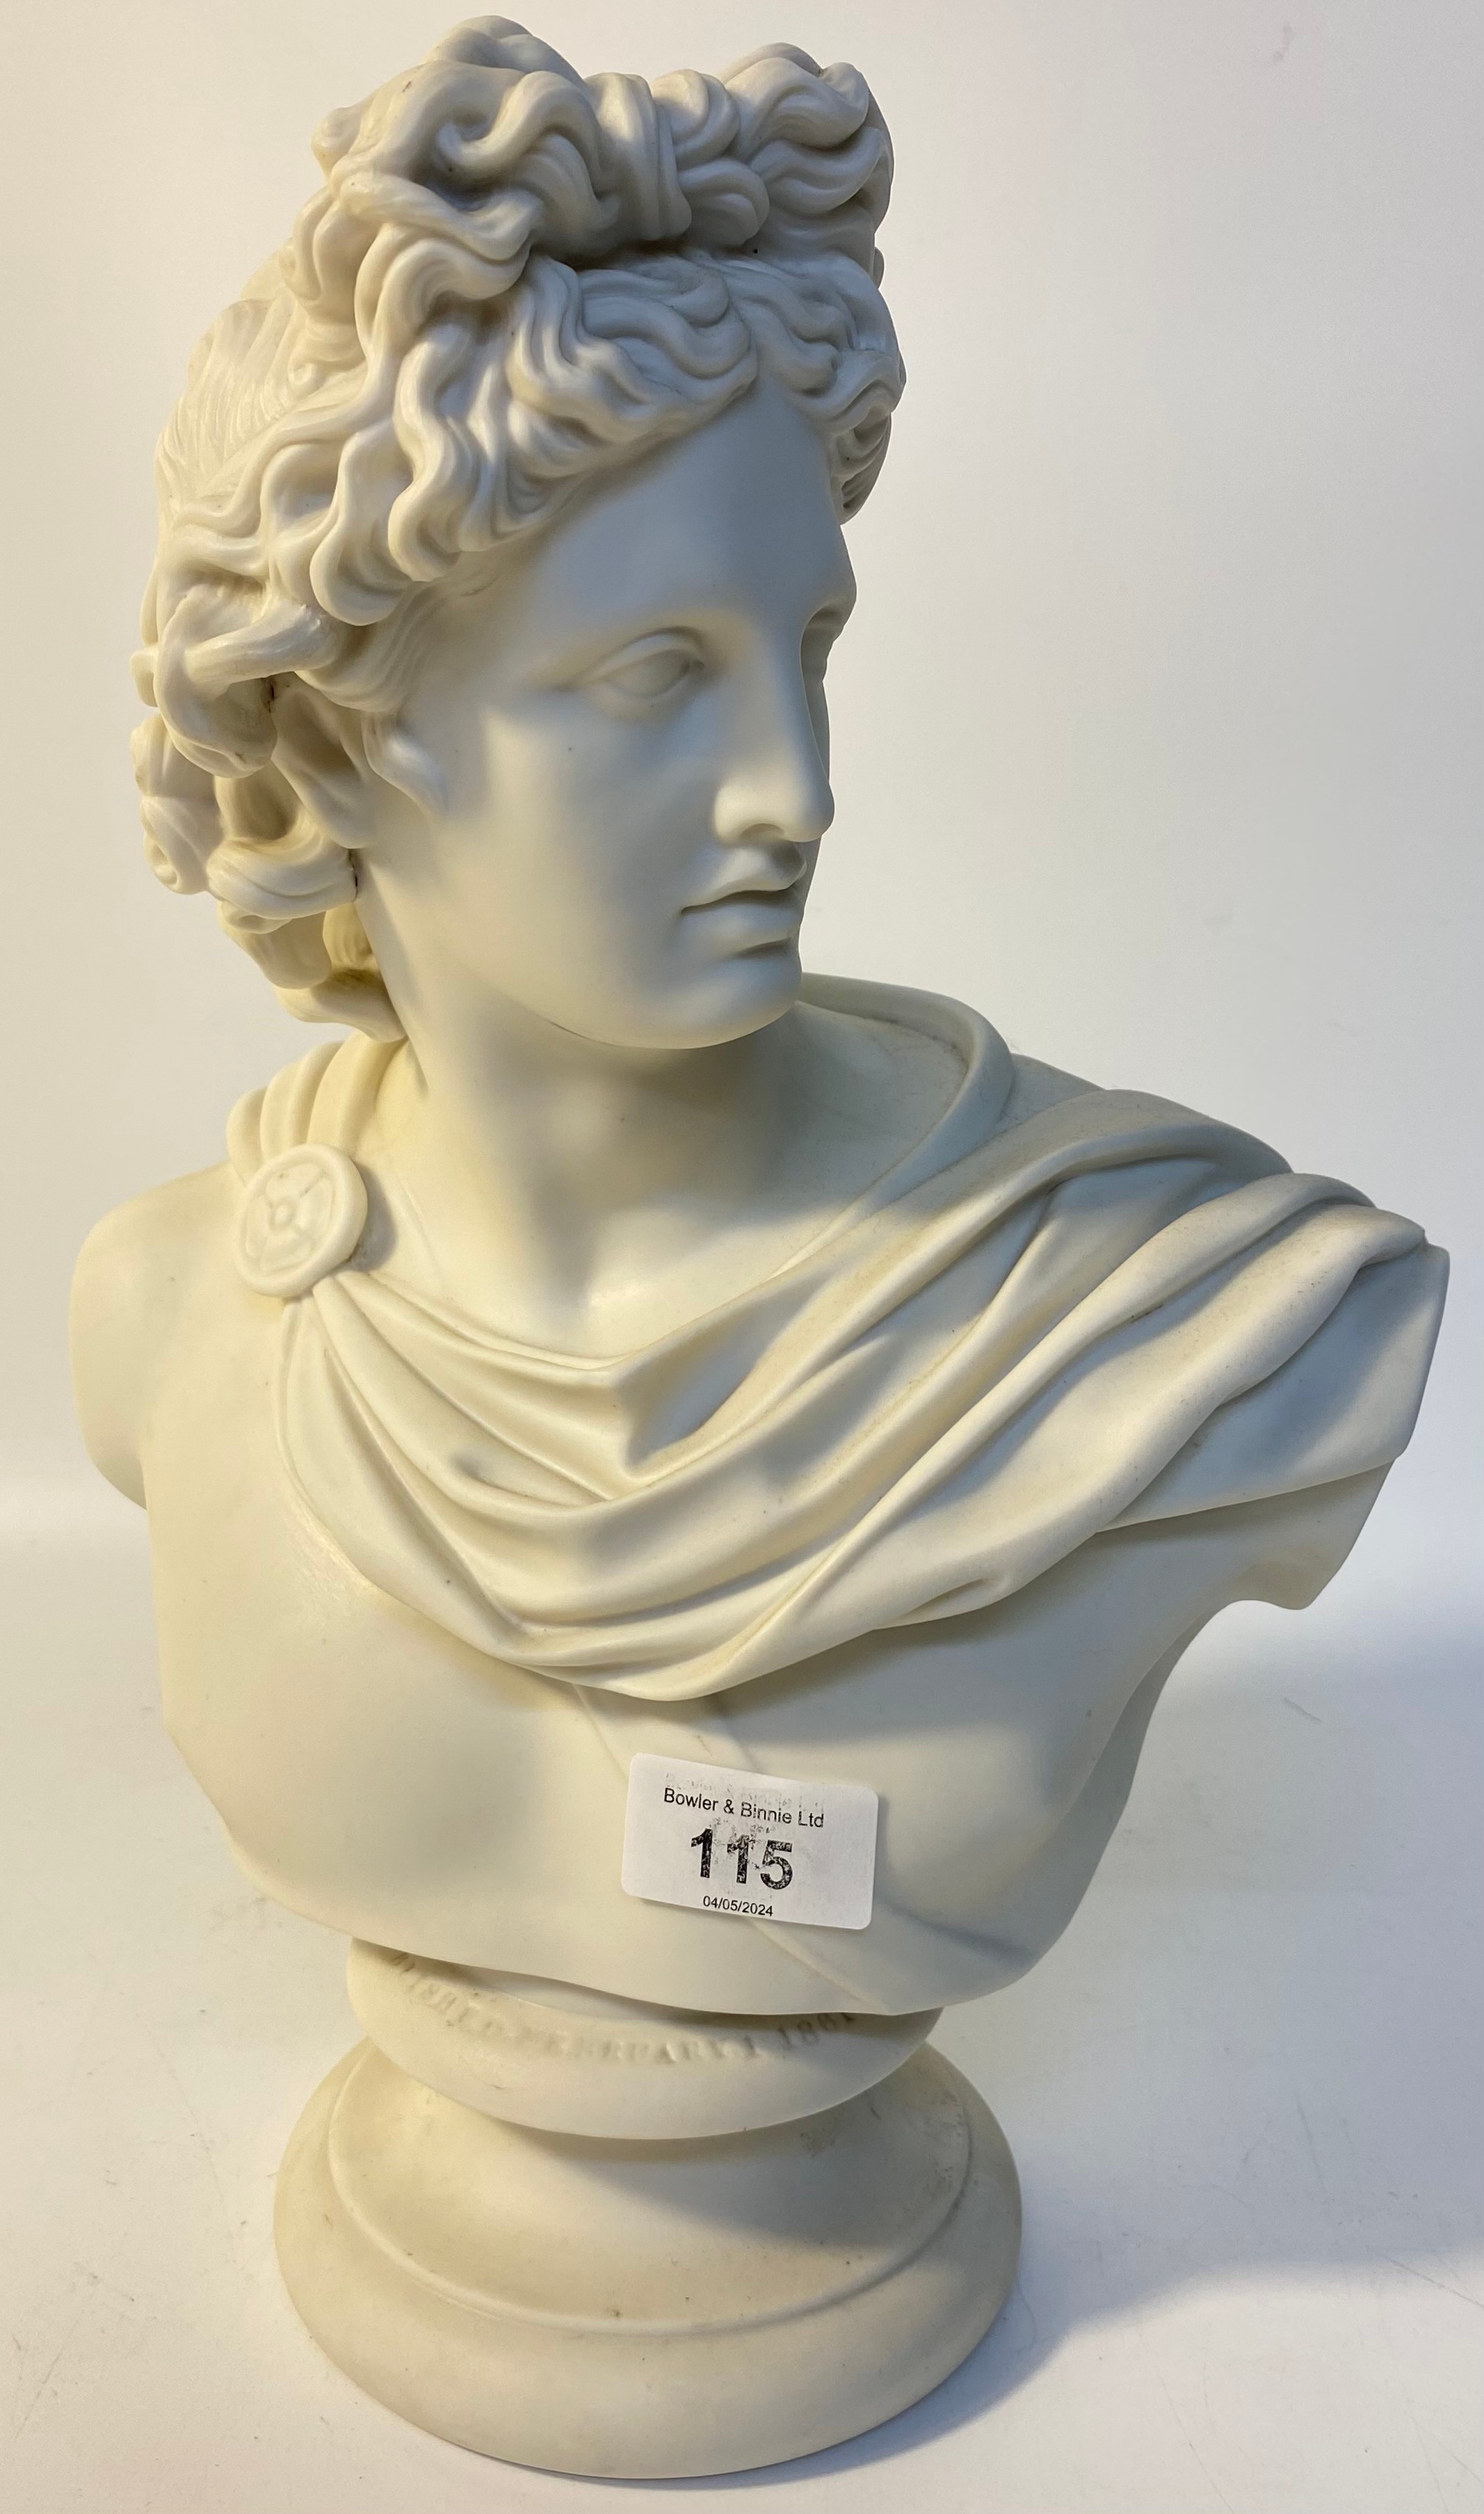 Parian Ware Bust Of Apollo by Delpech [23x35cm]